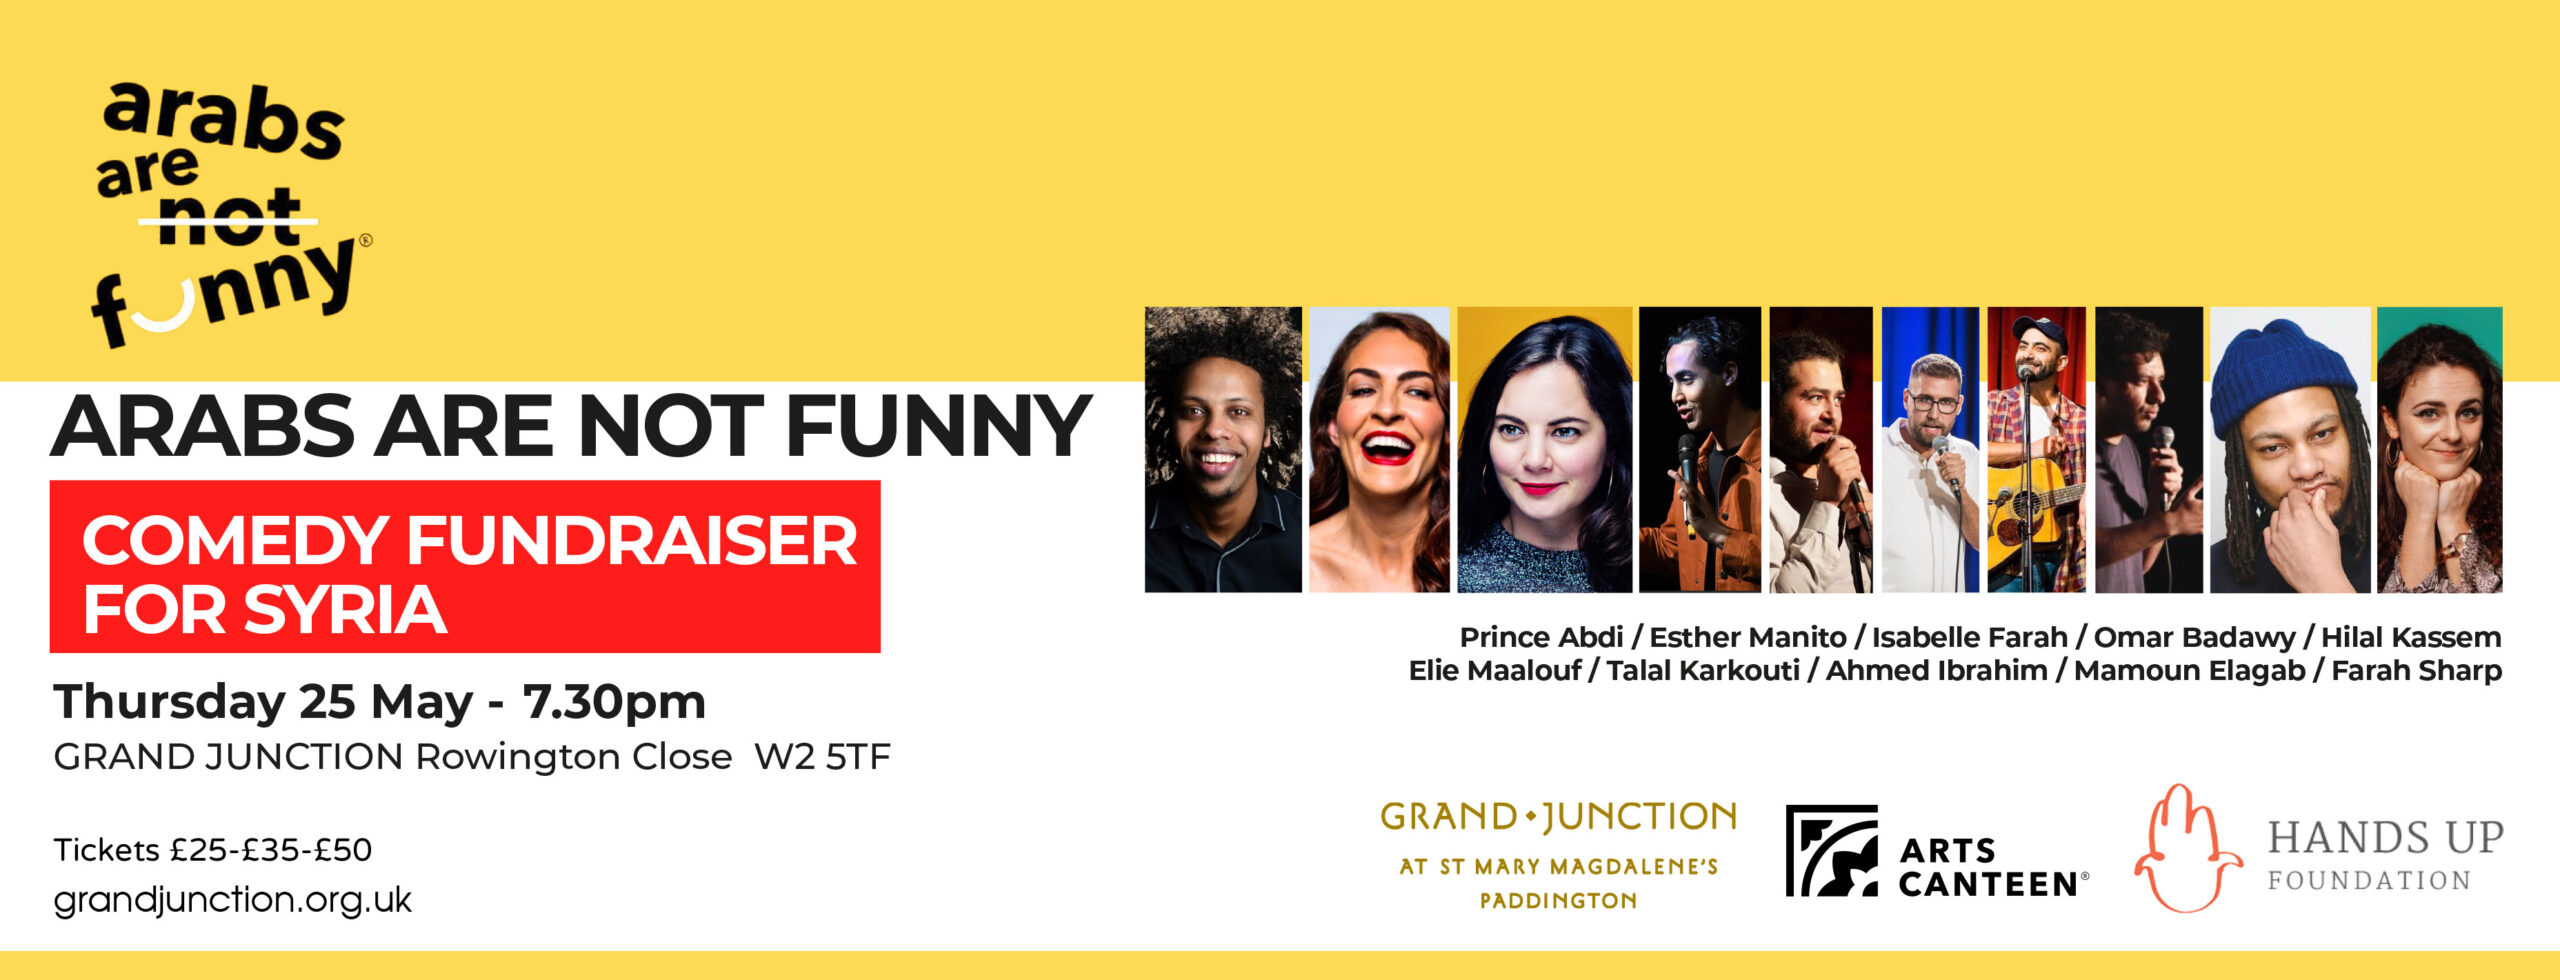 A group of performers on the poster for Arabs comedy show